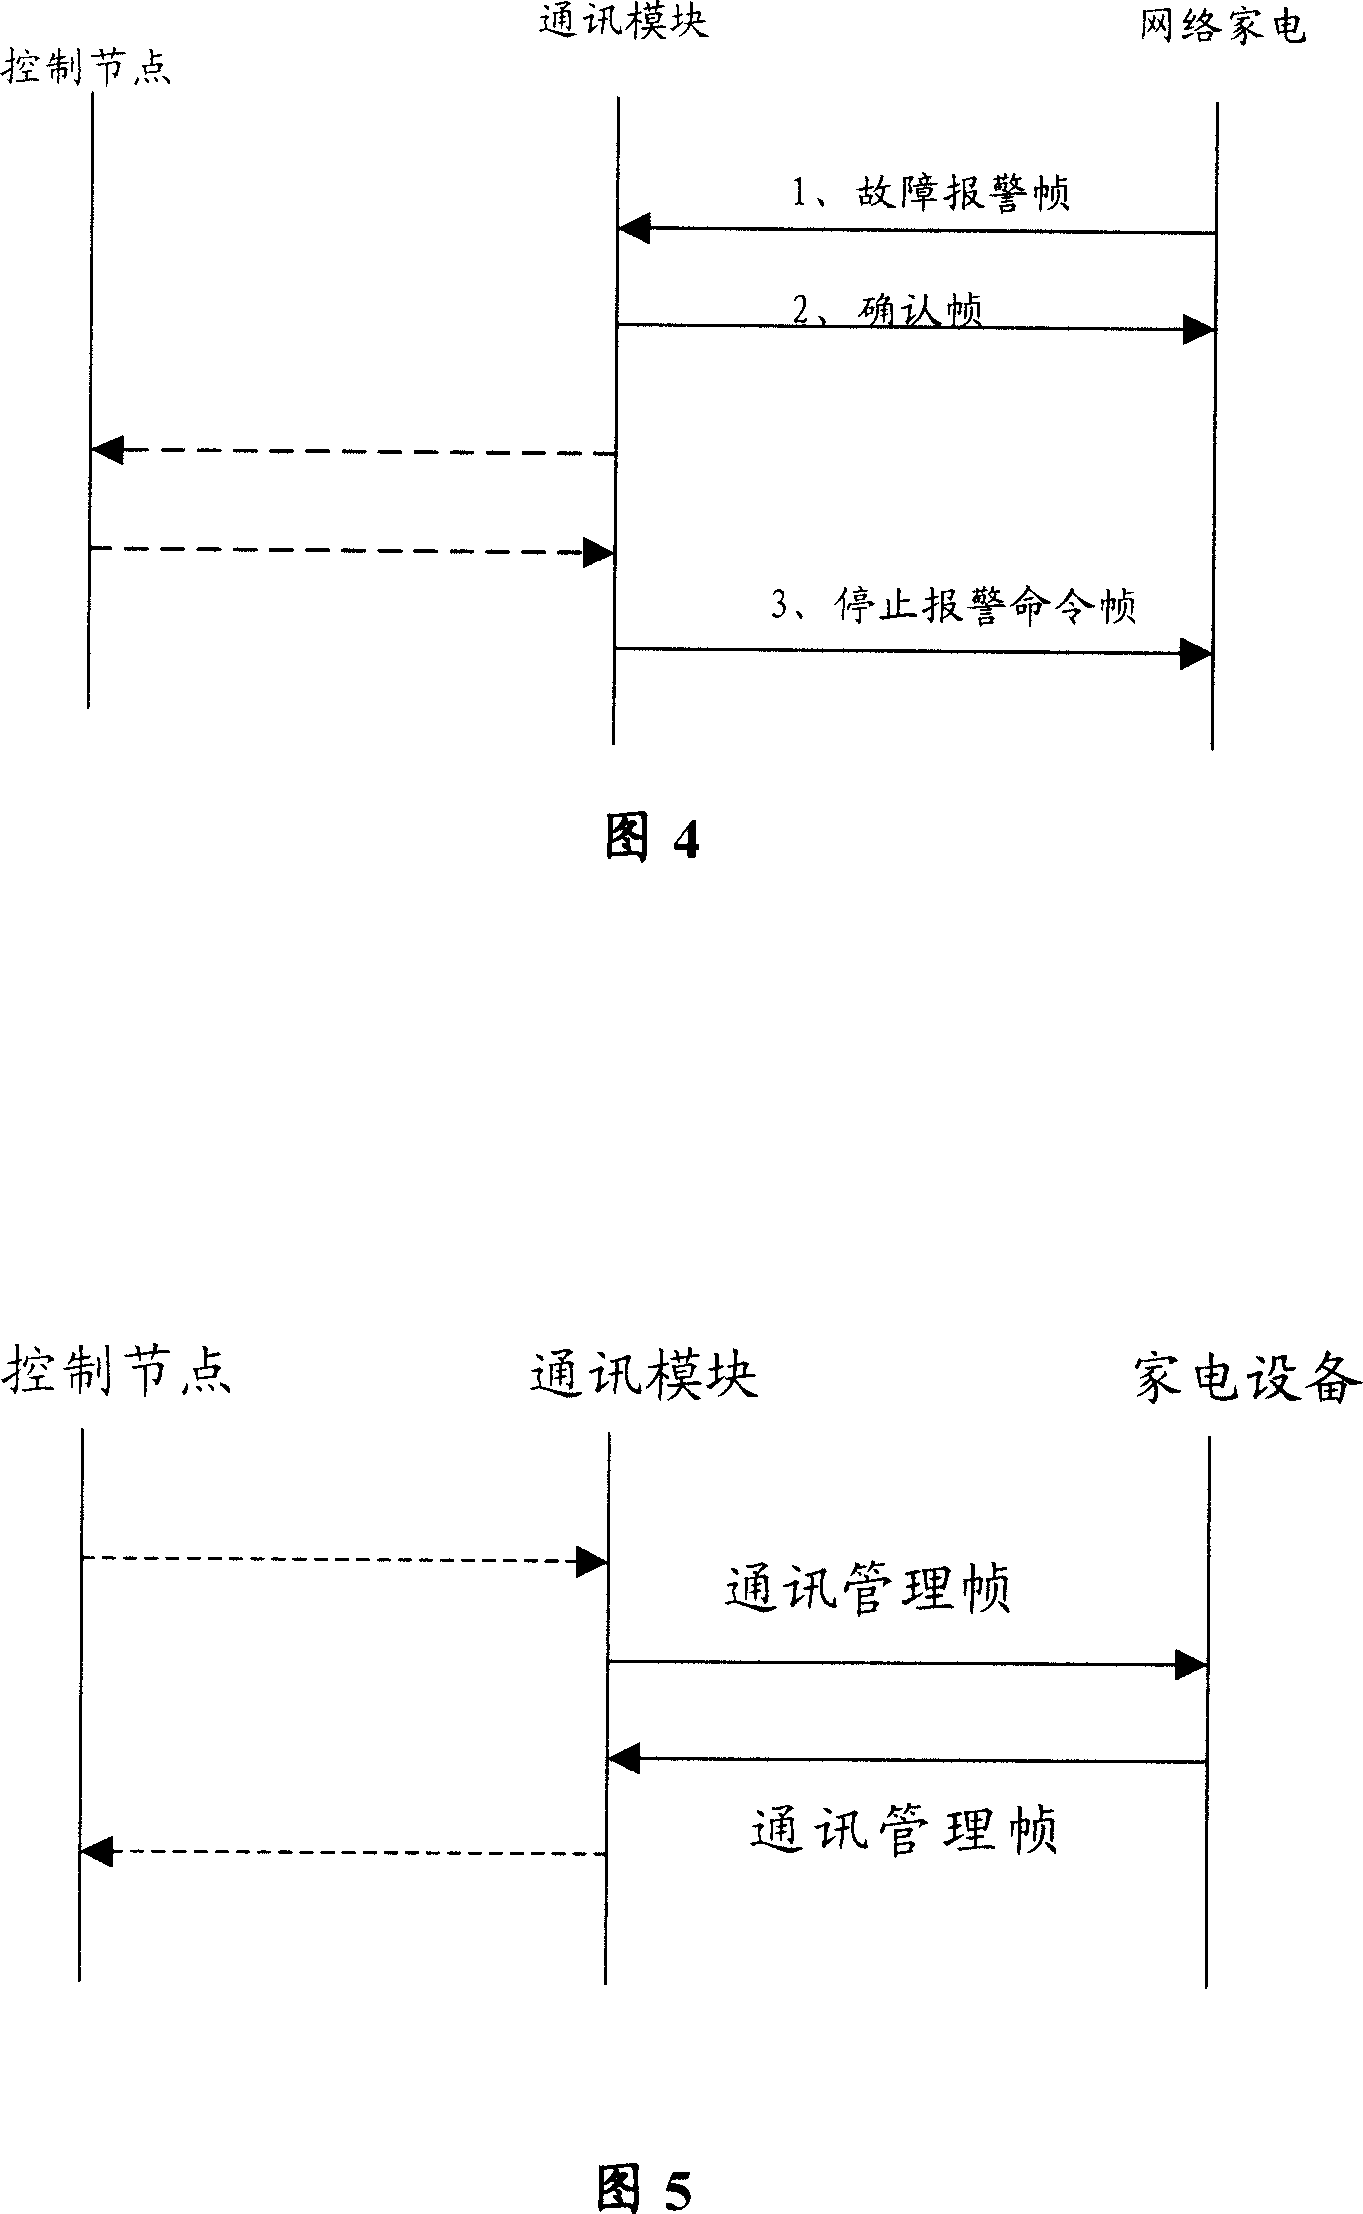 Communication interface and communication method for network household electrical appliance